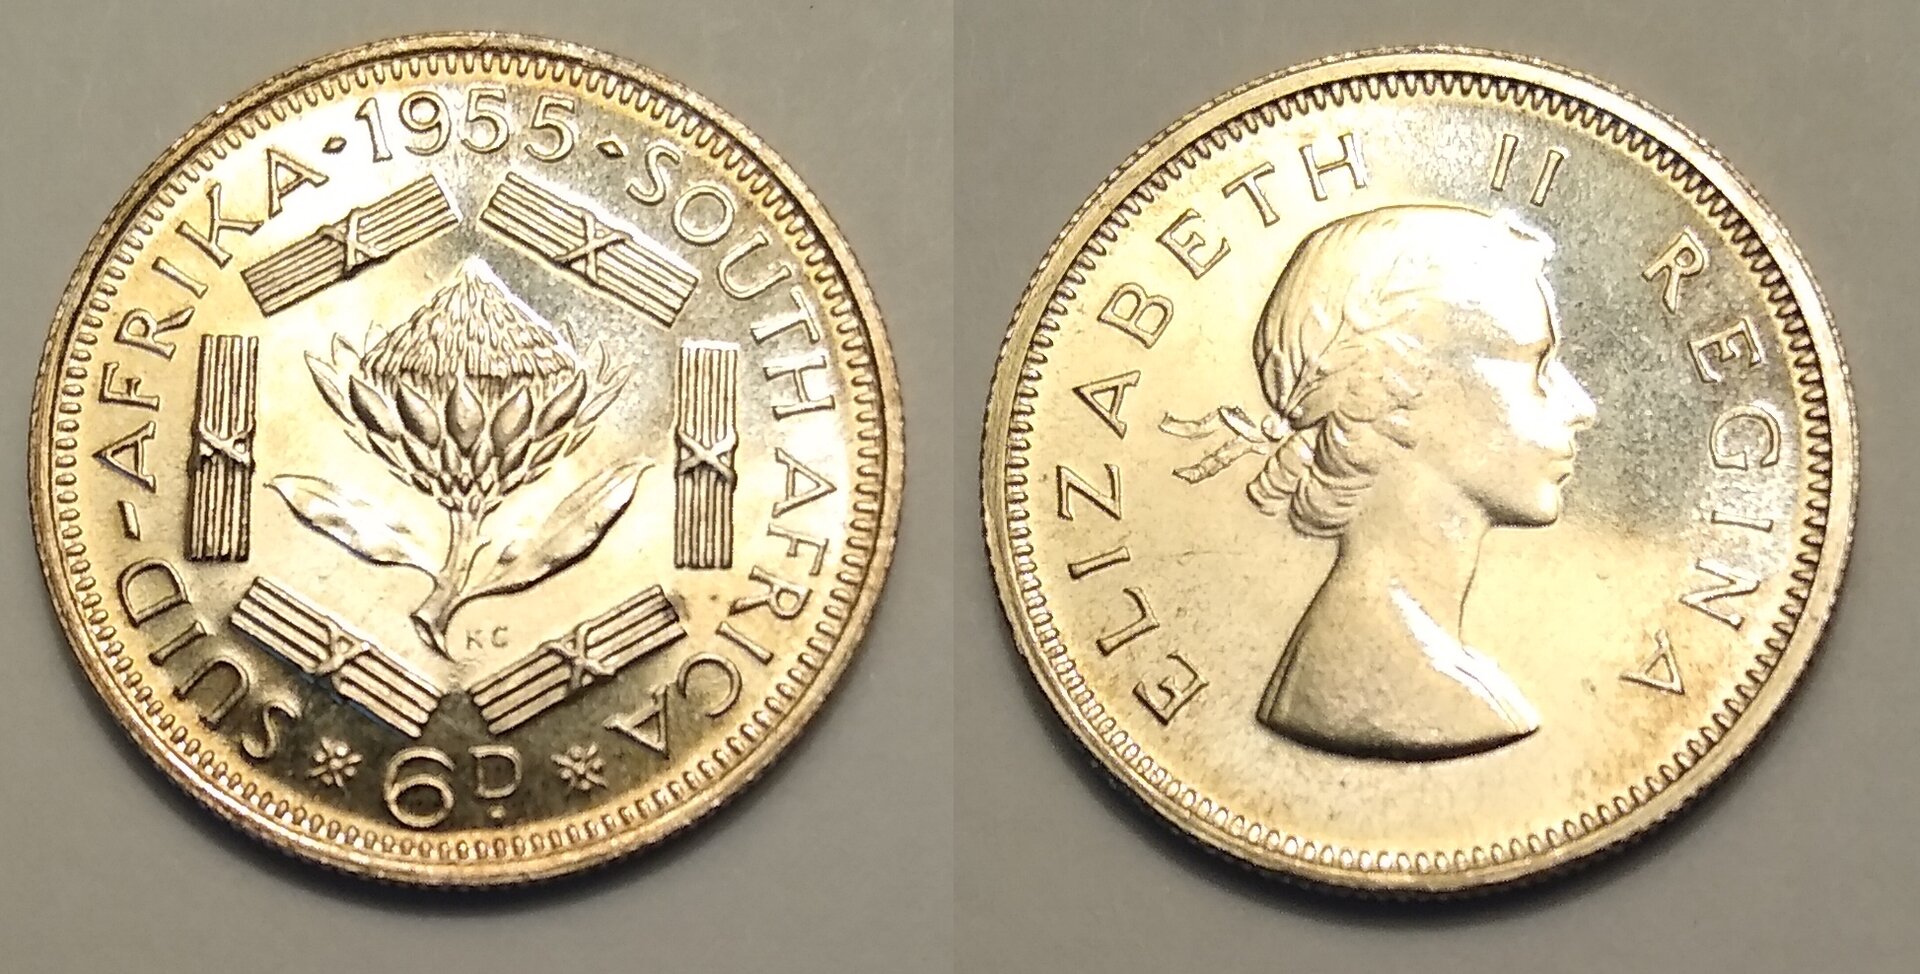 1955 south africa sixpence.jpg